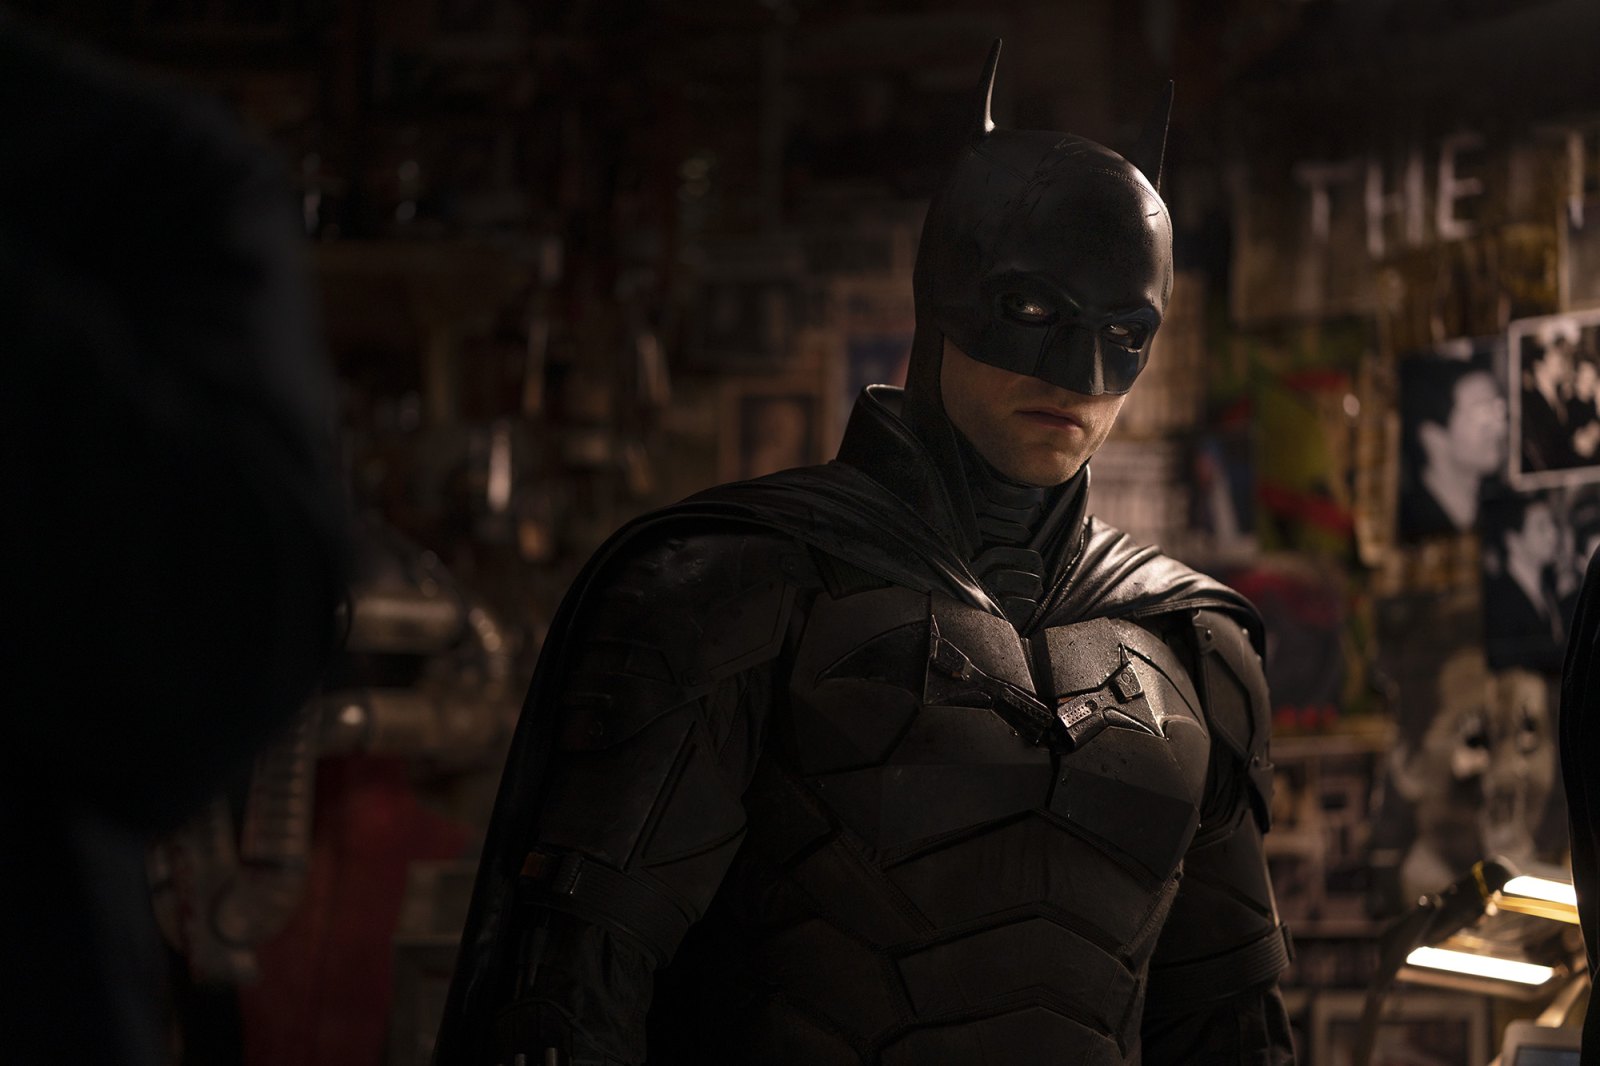 Robert Pattinson stars in The Batman, which releases in March 2022